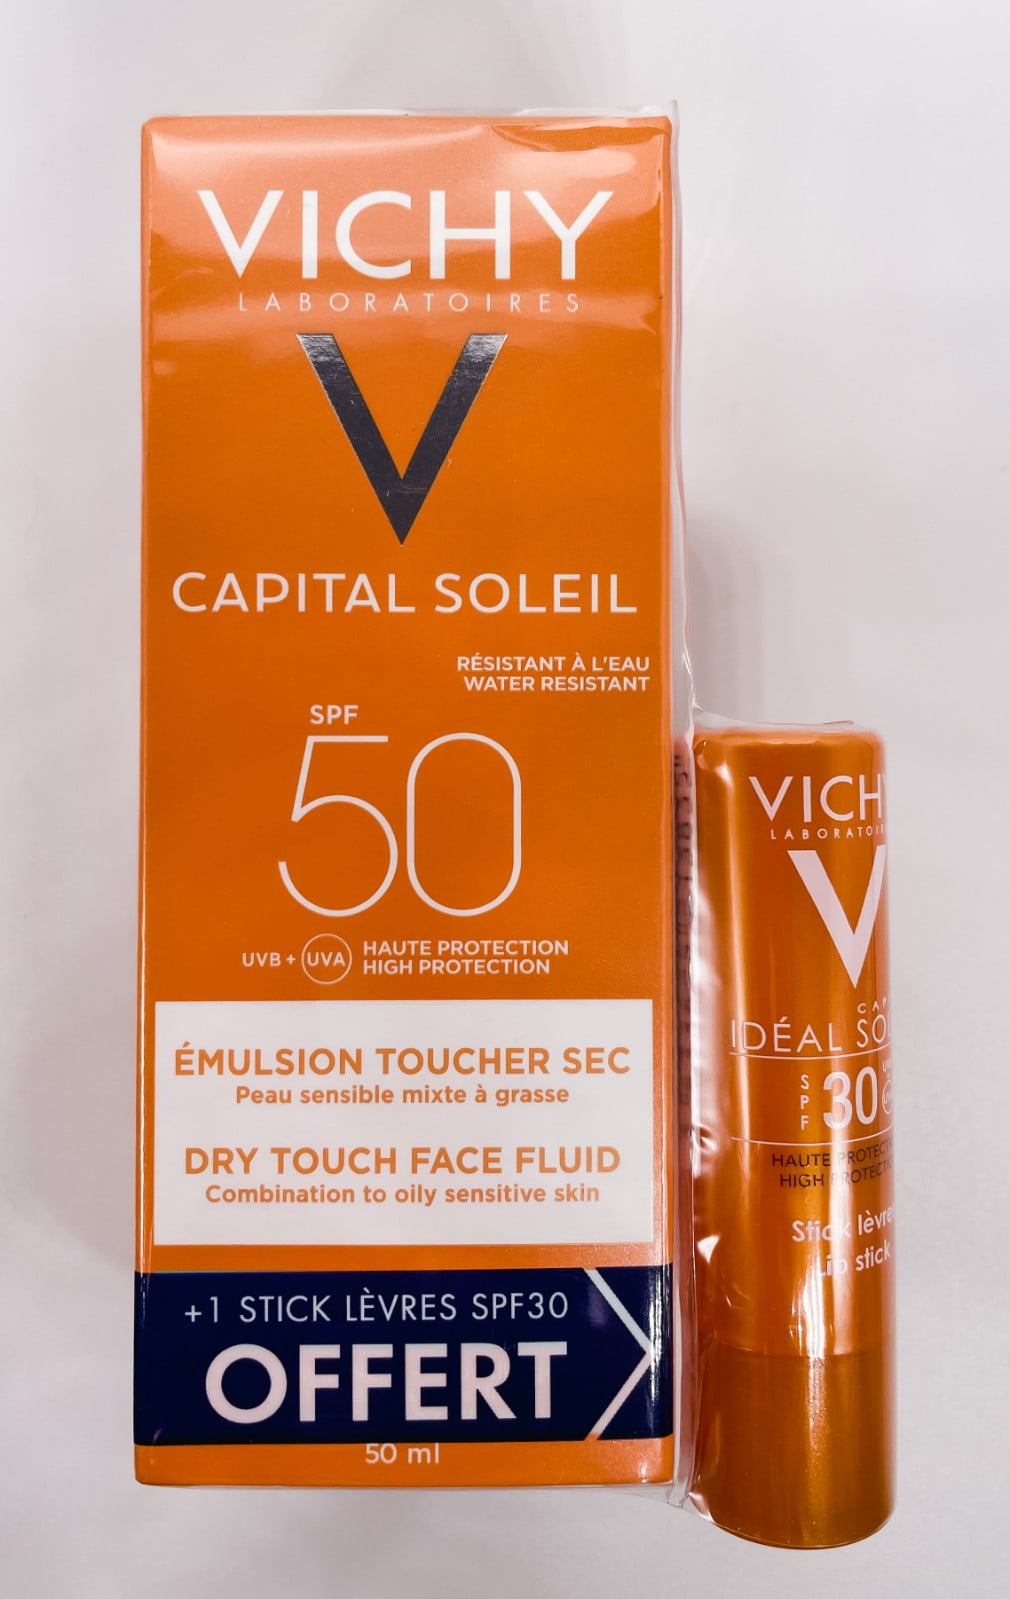 Vichy capital ideal soleil spf 50. Виши СПФ 50. Виши 30 SPF. Vichy СПФ 50 Capital Soleil Beach protect.